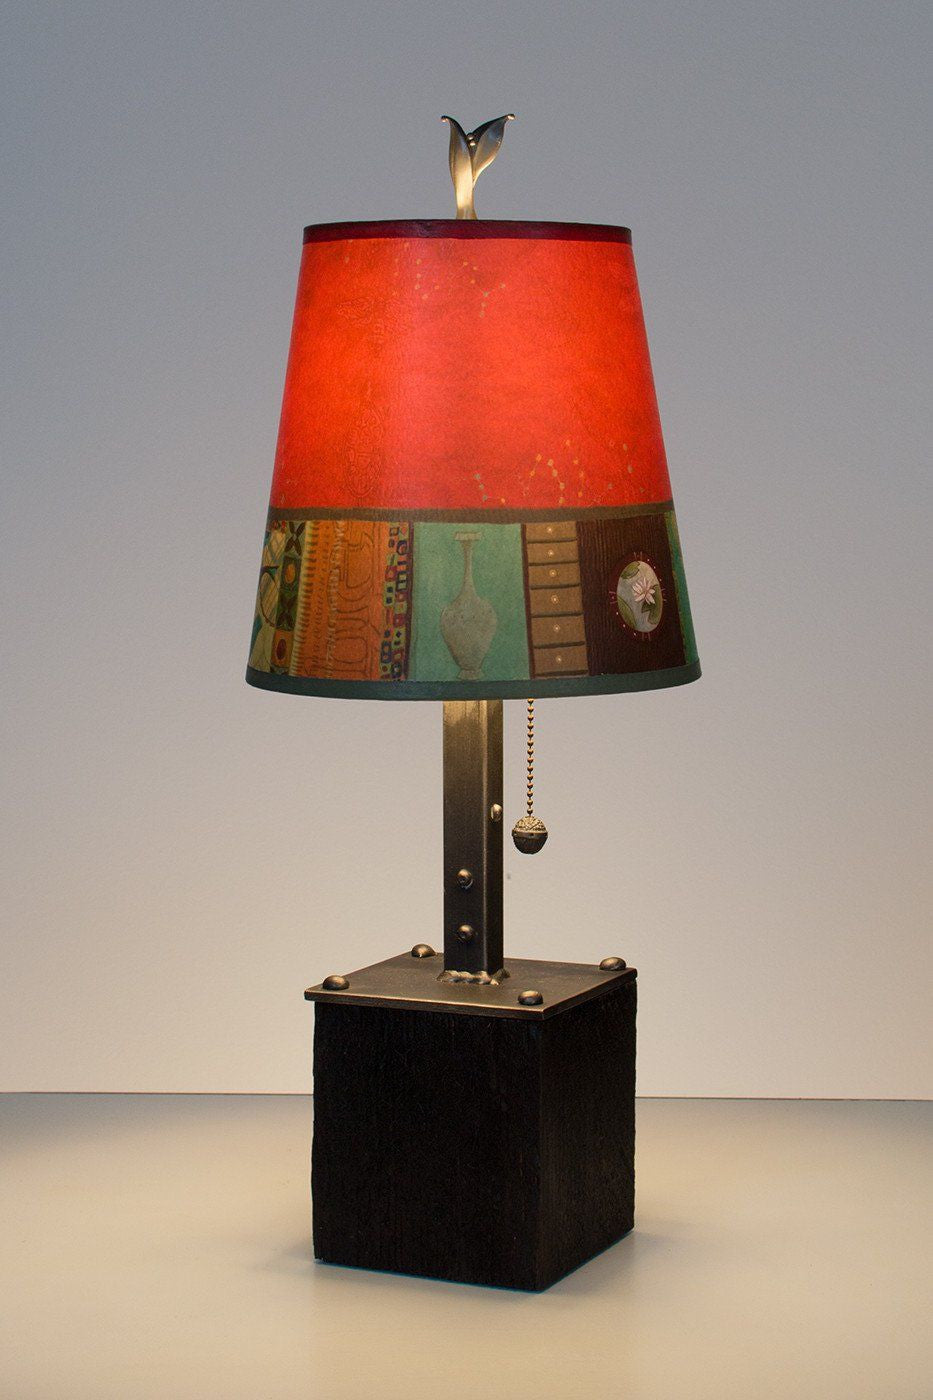 Steel Table Lamp on Reclaimed Wood with Small Drum Shade in Red Match Lit